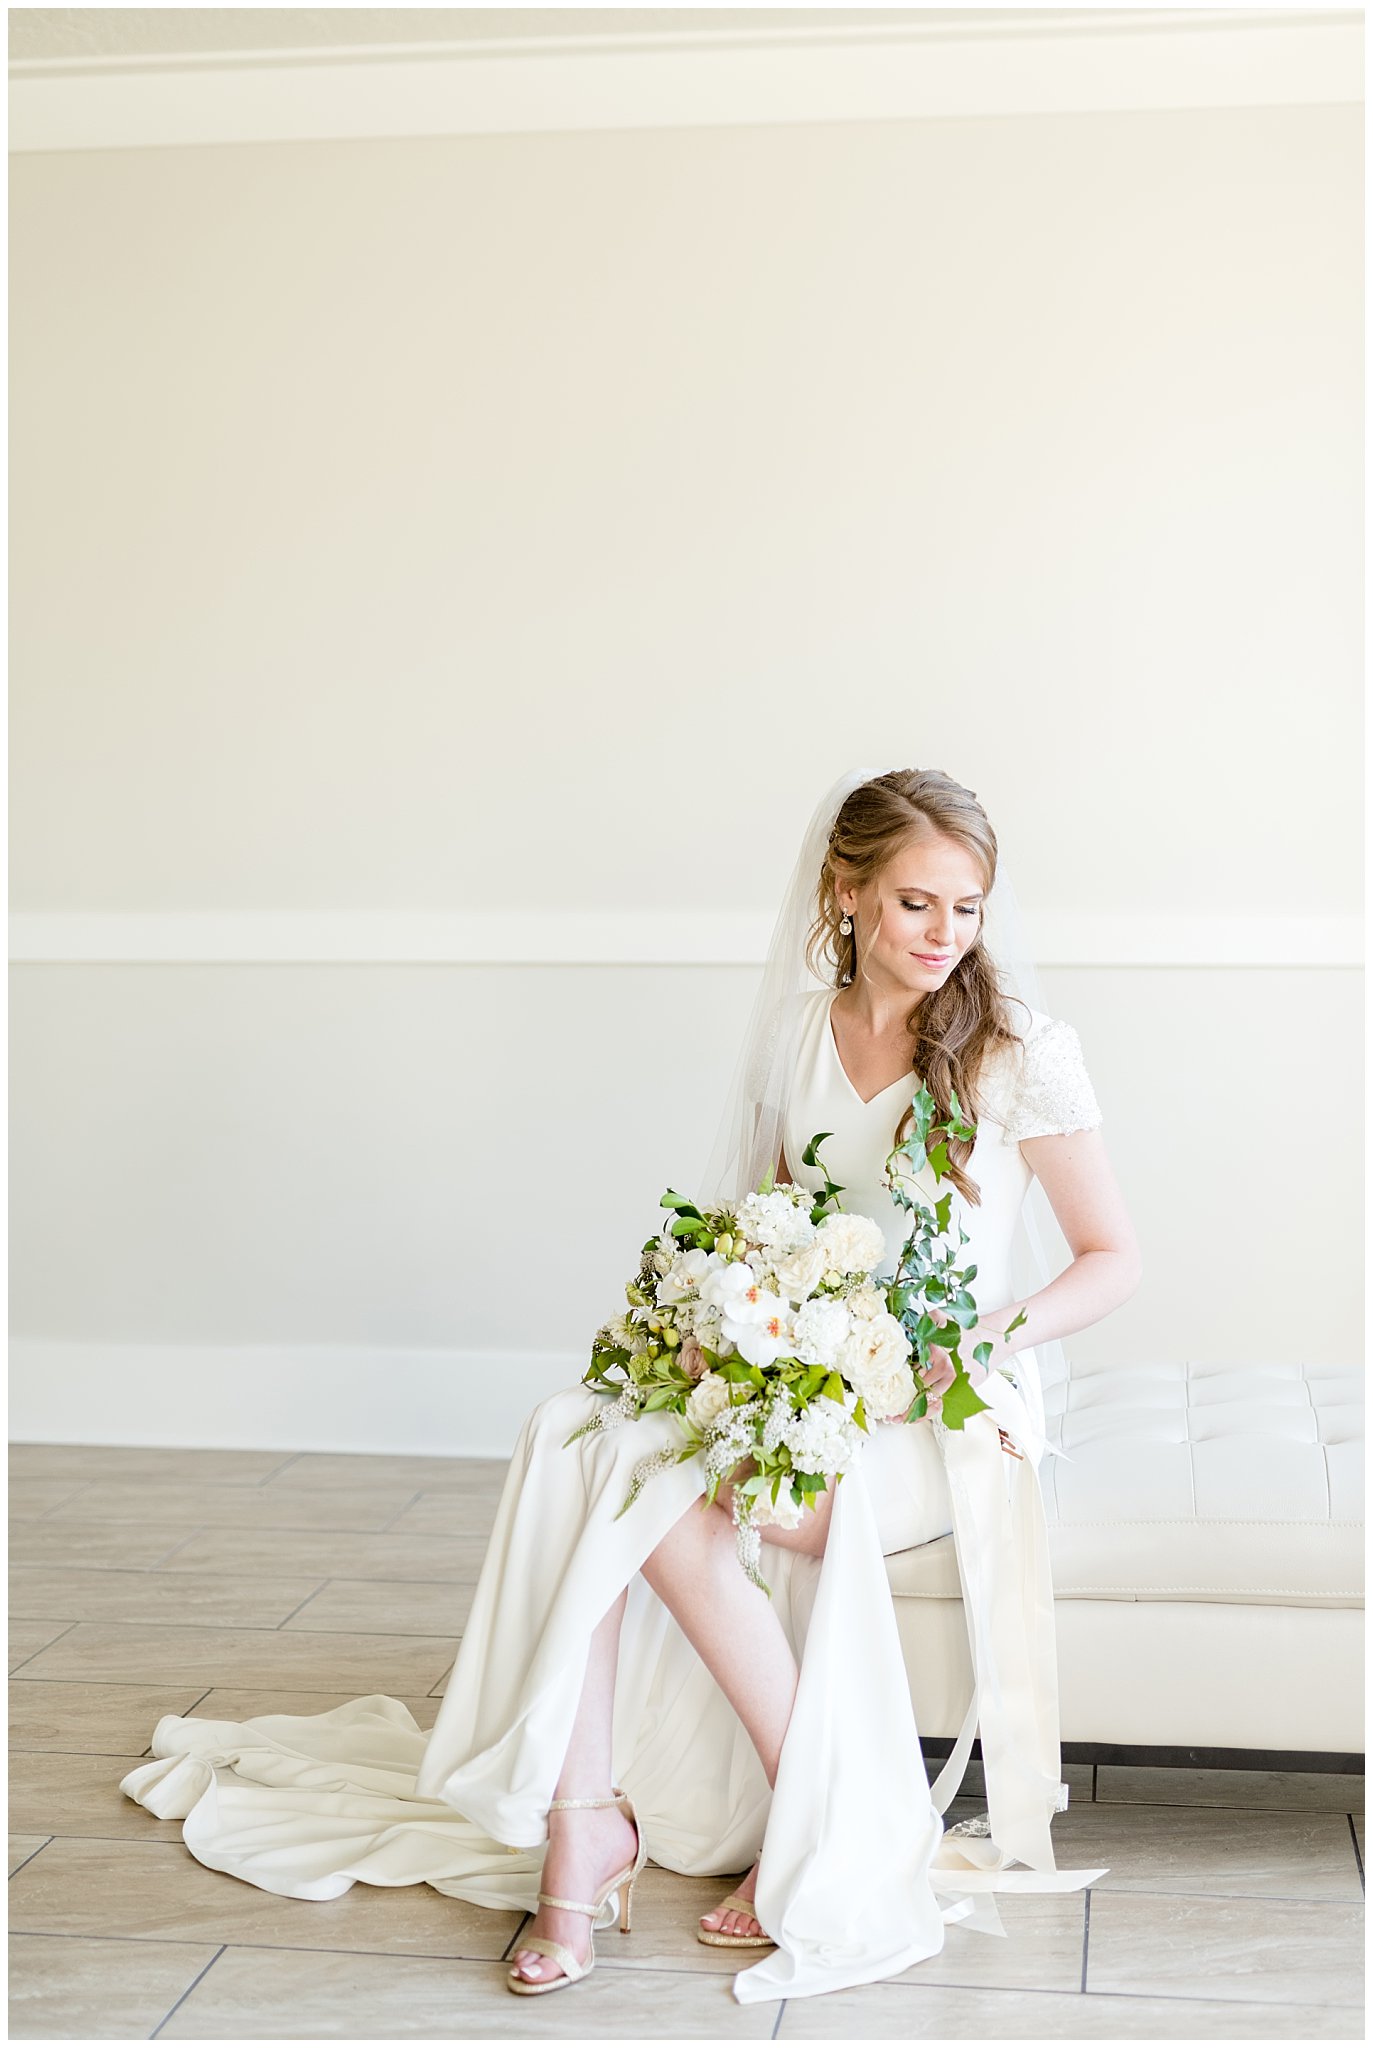 Bright and joyful bridal shot with bouquet. Bride sitting on chair | Talia Event Center